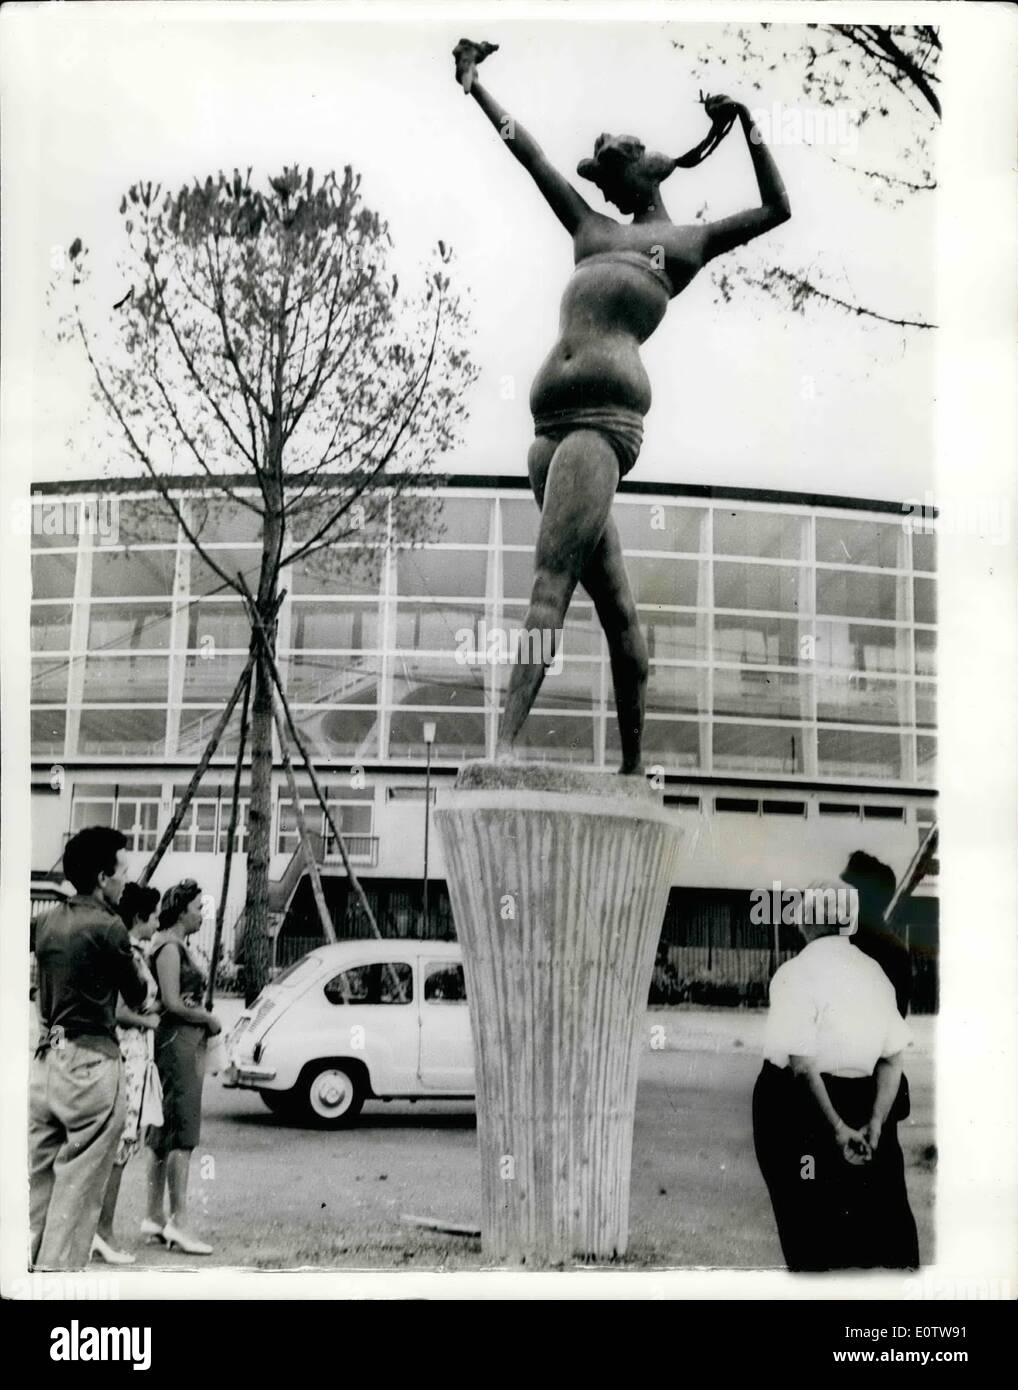 Aug. 08, 1960 - Rome Is Almost Ready For Th Olympics 1960; Photo Shows The statue of a figure holding the Olympic torch, by sculptor Grace, which has been erected in front of the Sports Palace. Stock Photo